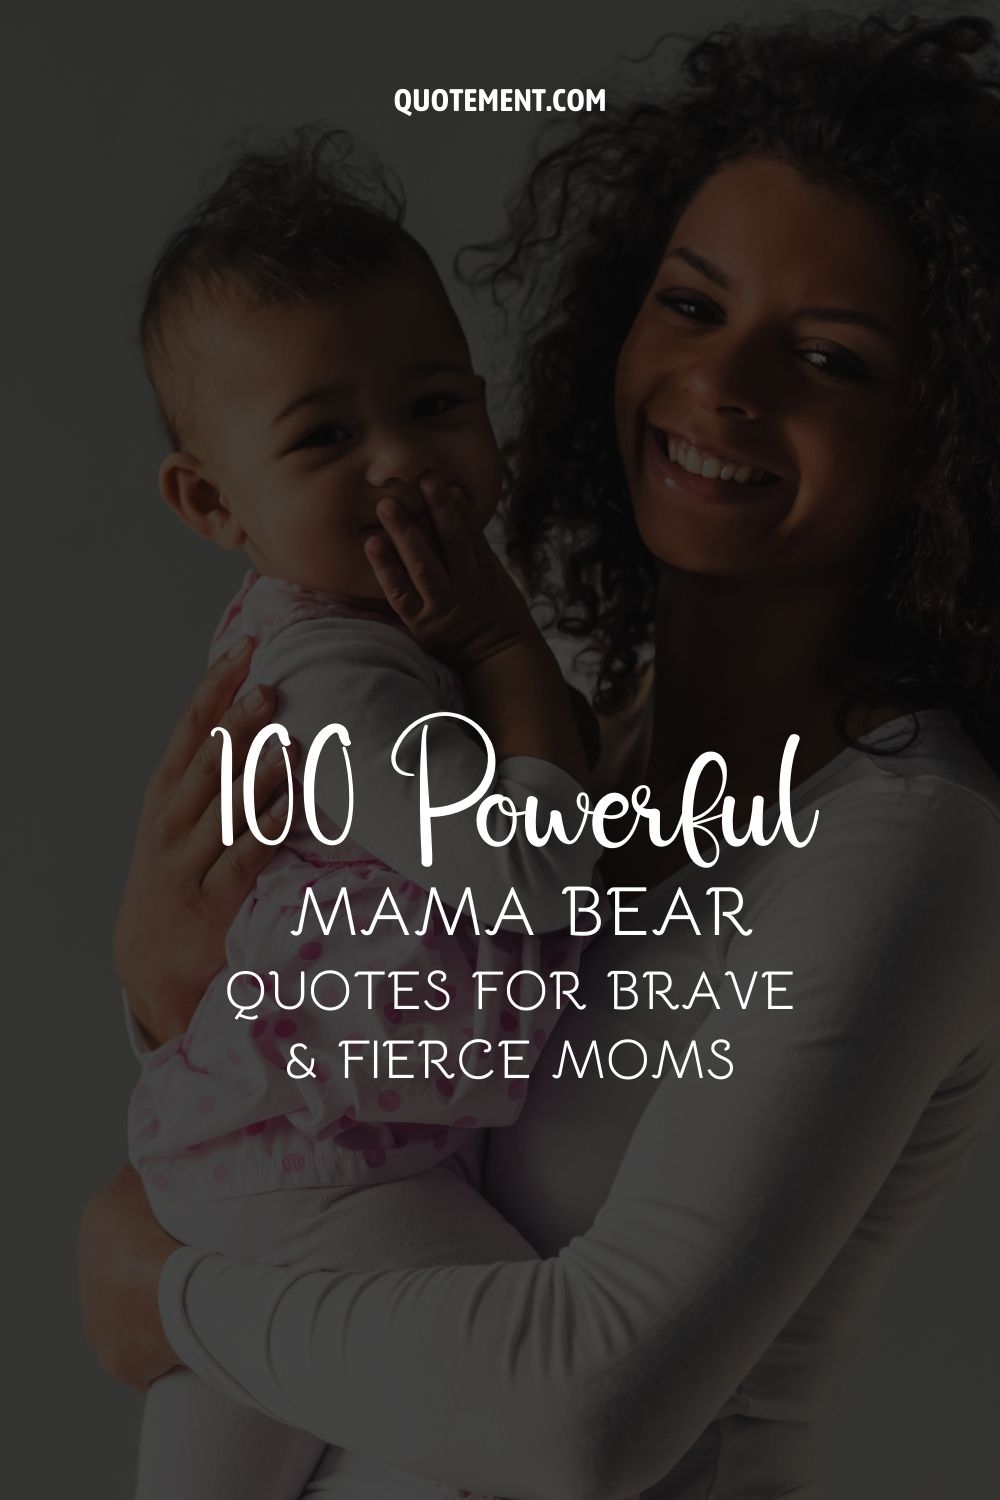 100 PowePowerful momma bear quote.rful Mama Bear Quotes For Brave & Fierce Moms